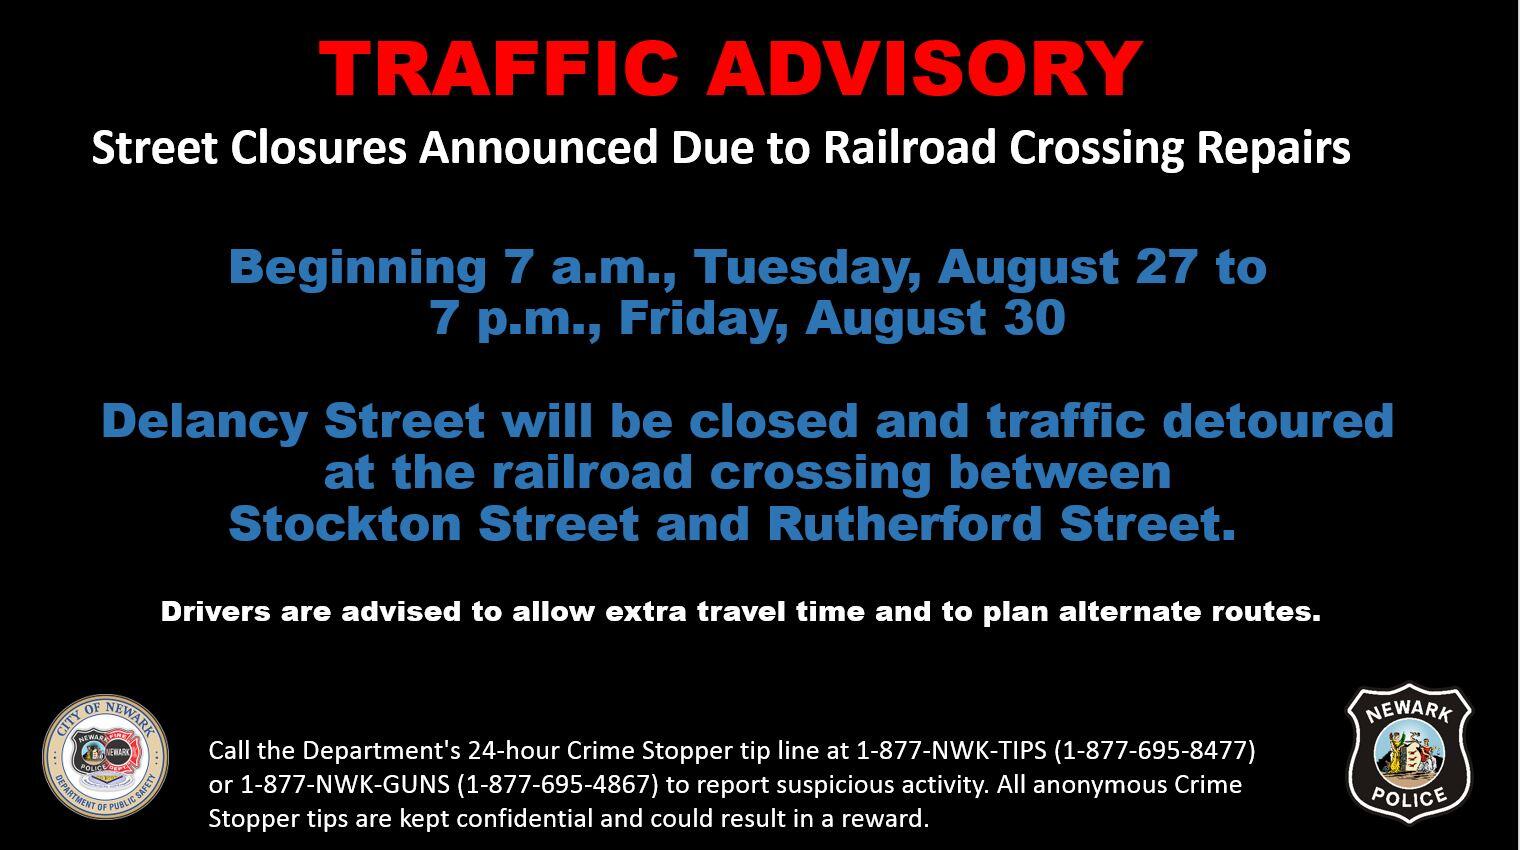 Traffic Advisory Delancy Street To Be Closed And Traffic Detoured For Railroad Crossing